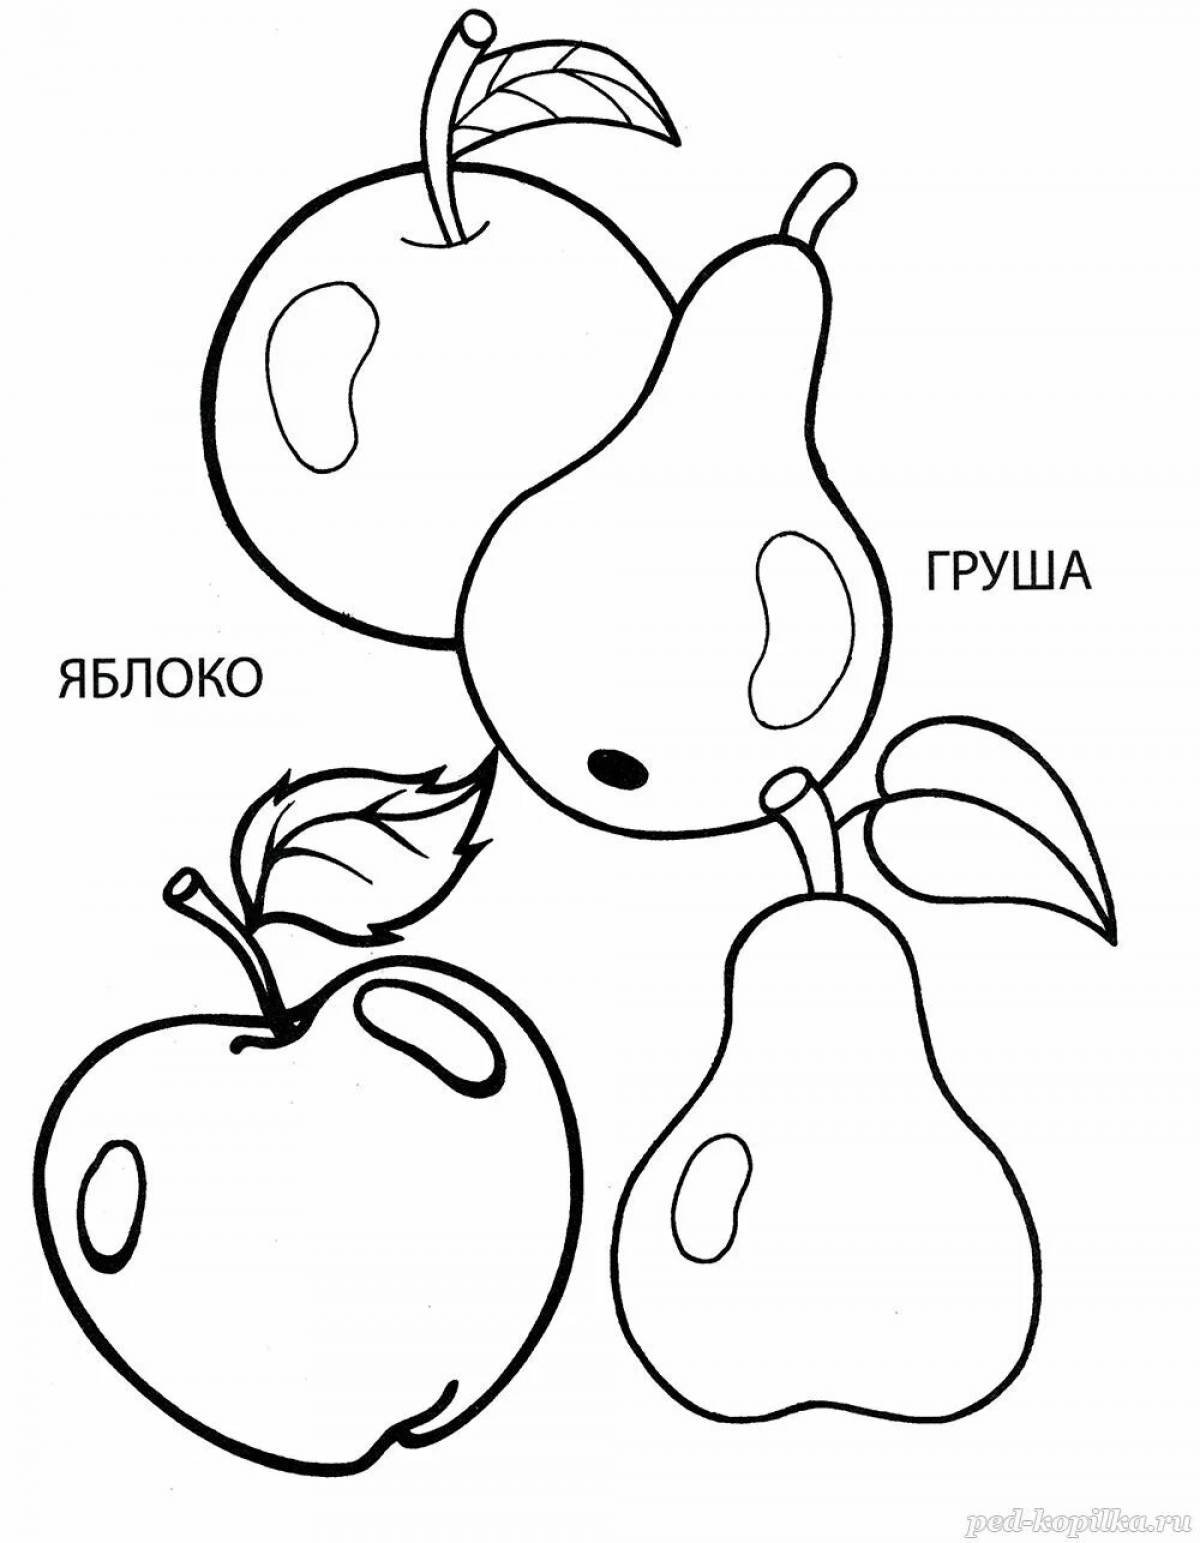 A funny pear coloring book for 3-4 year olds